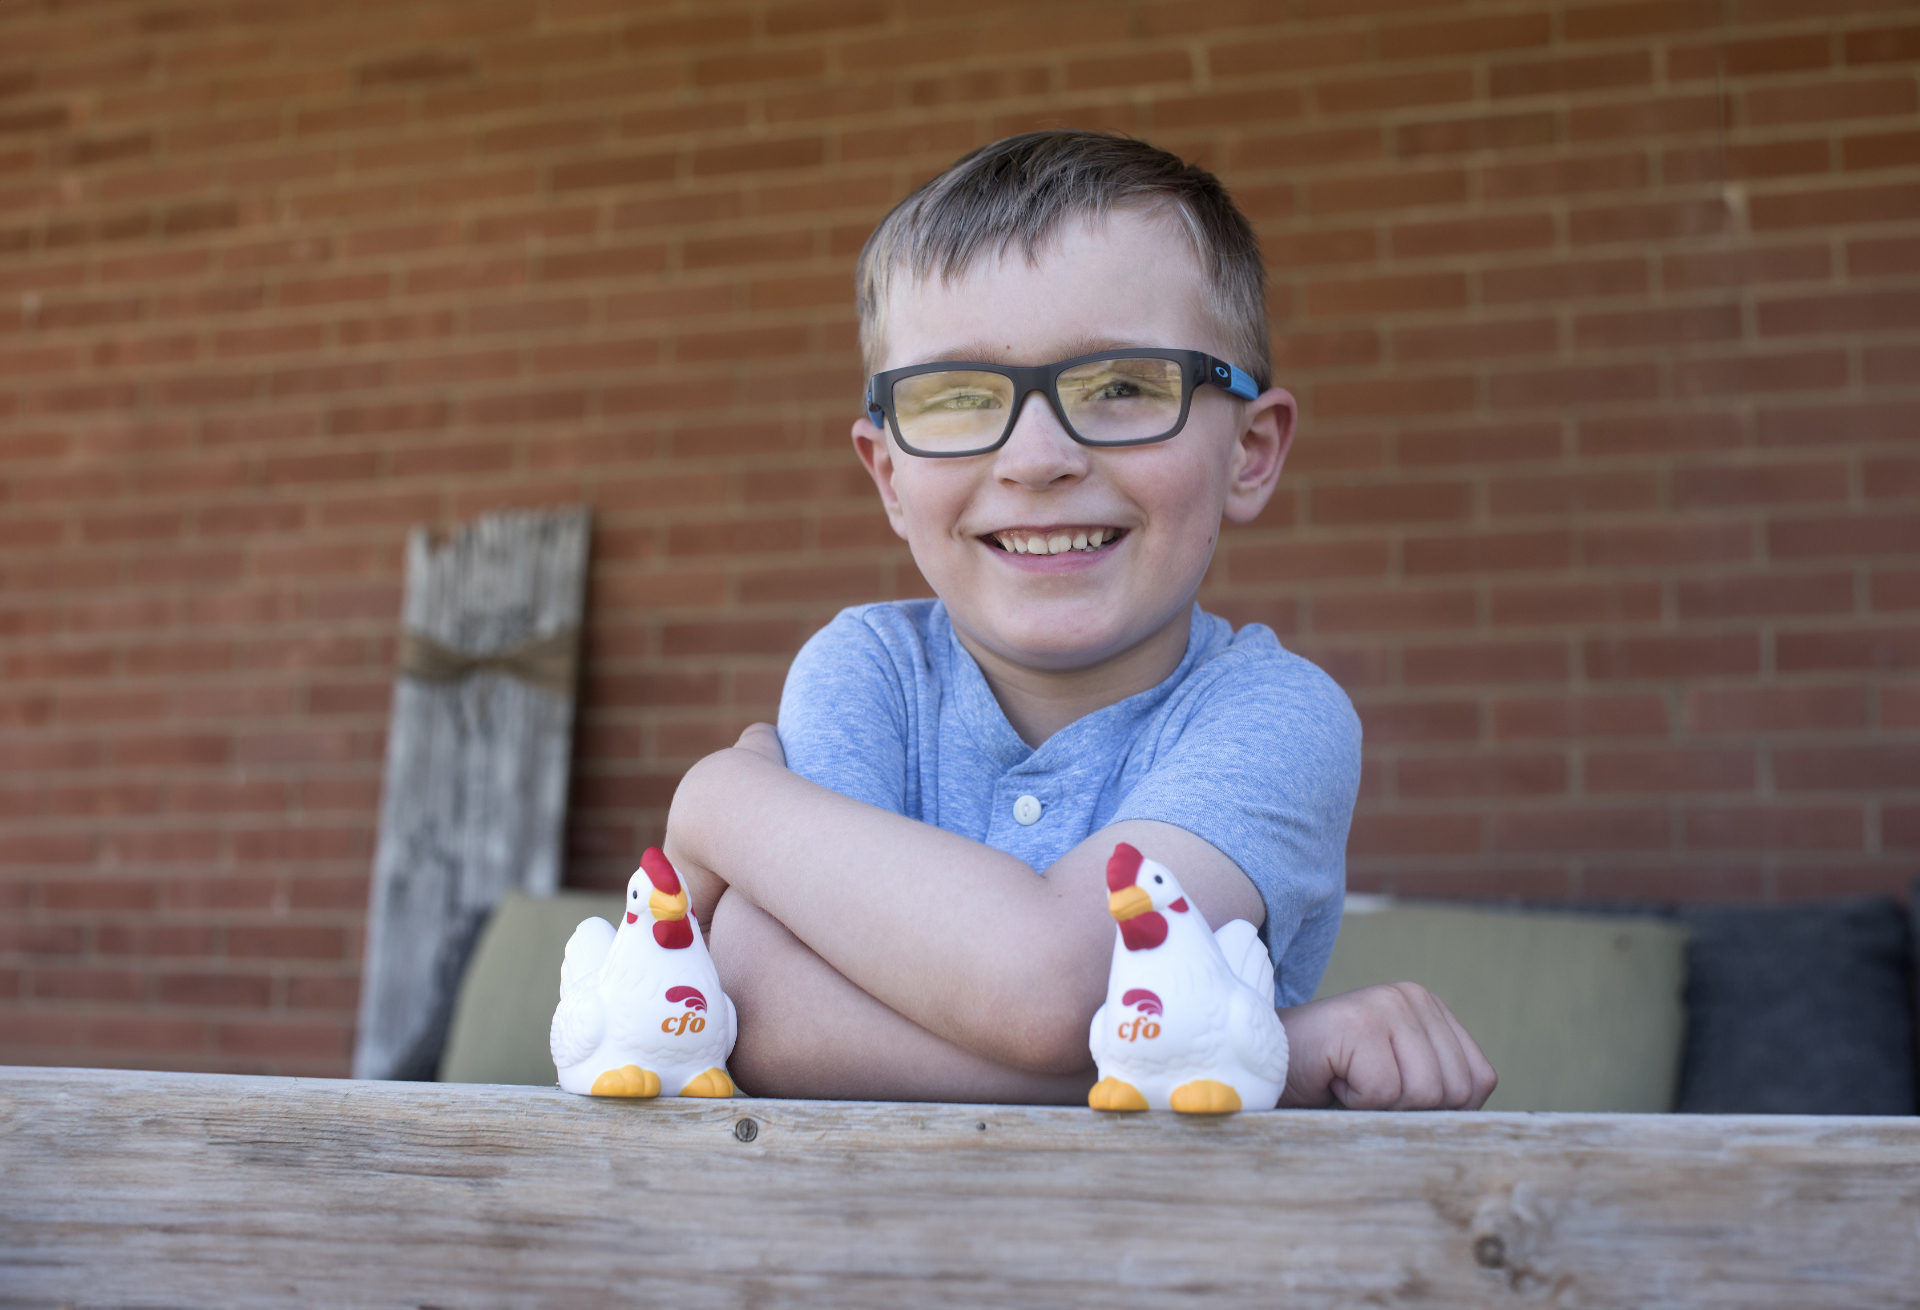 A young boy smiling at the camera with a CFO chicken toy in front of him